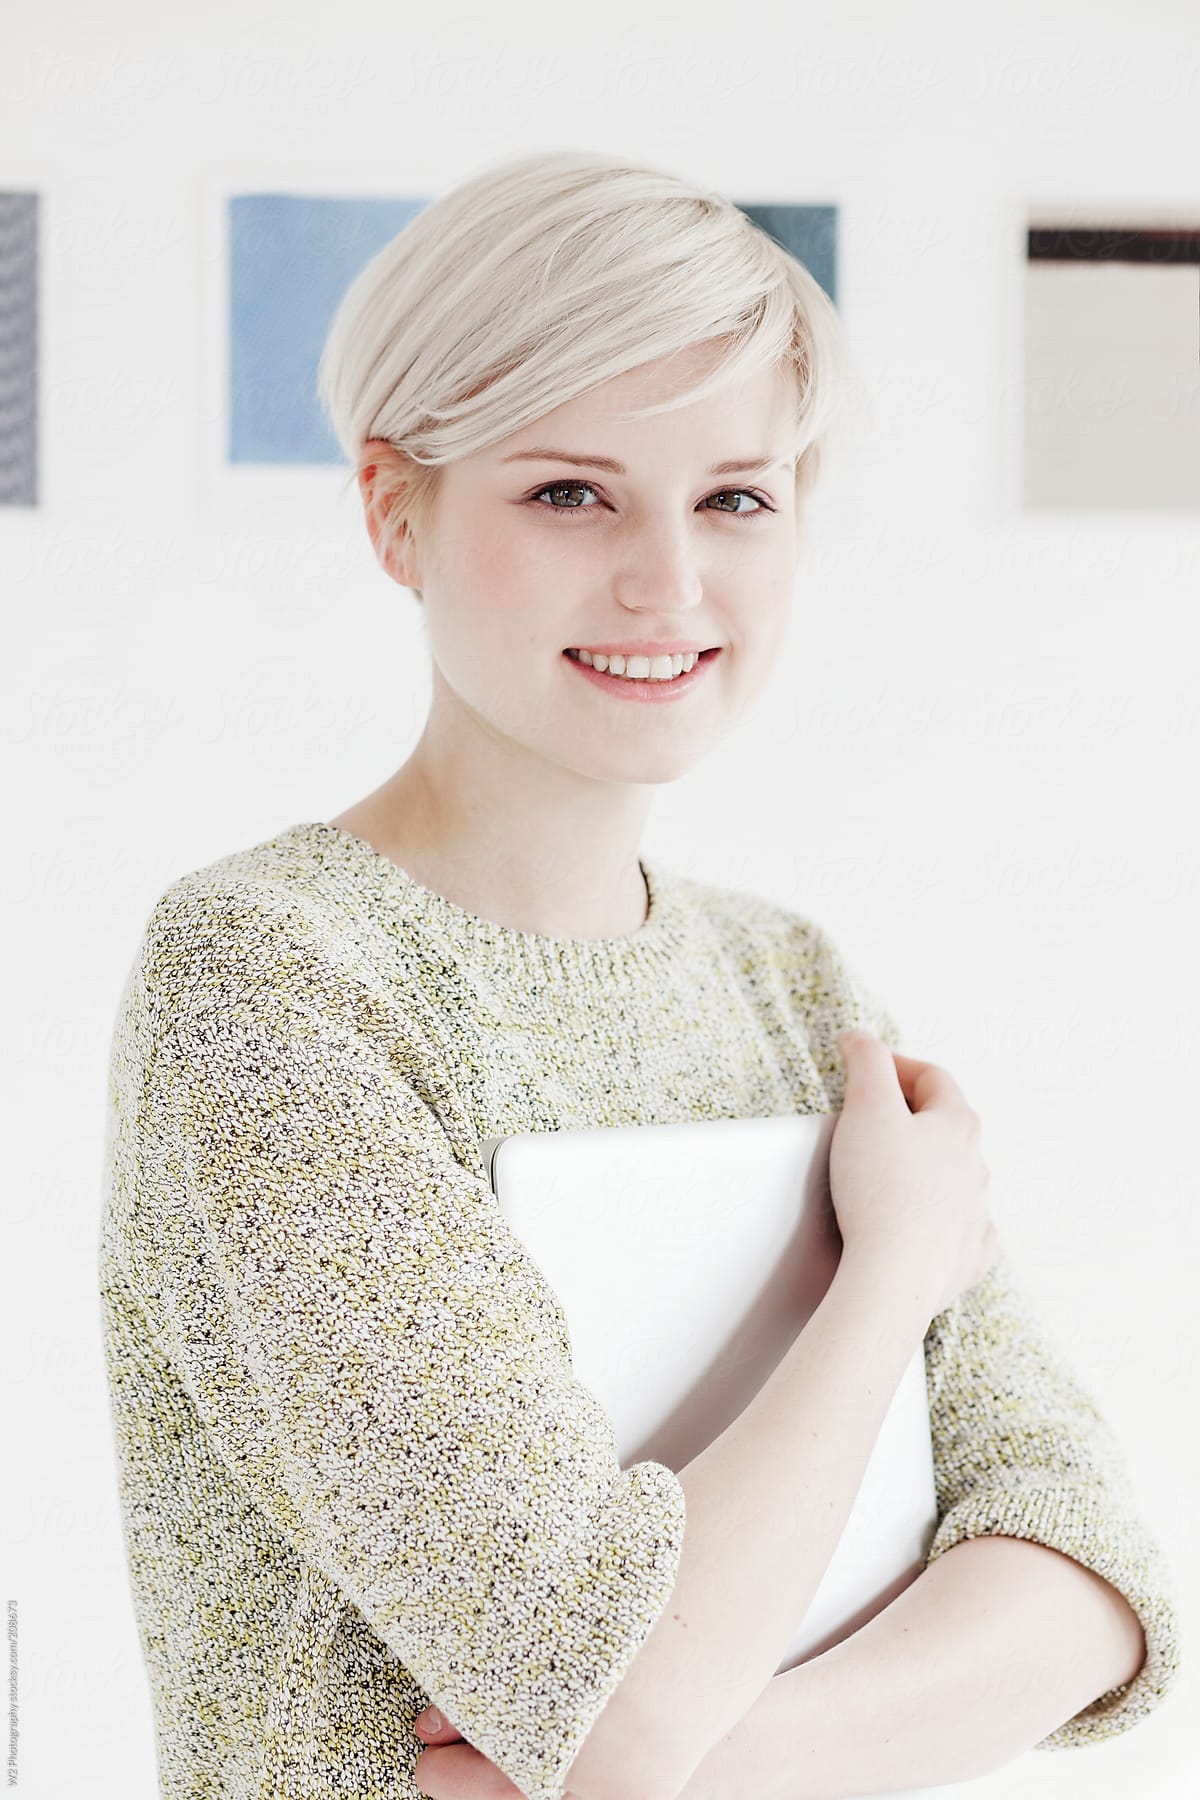 Portrait of a smiling young woman holding a tablet.